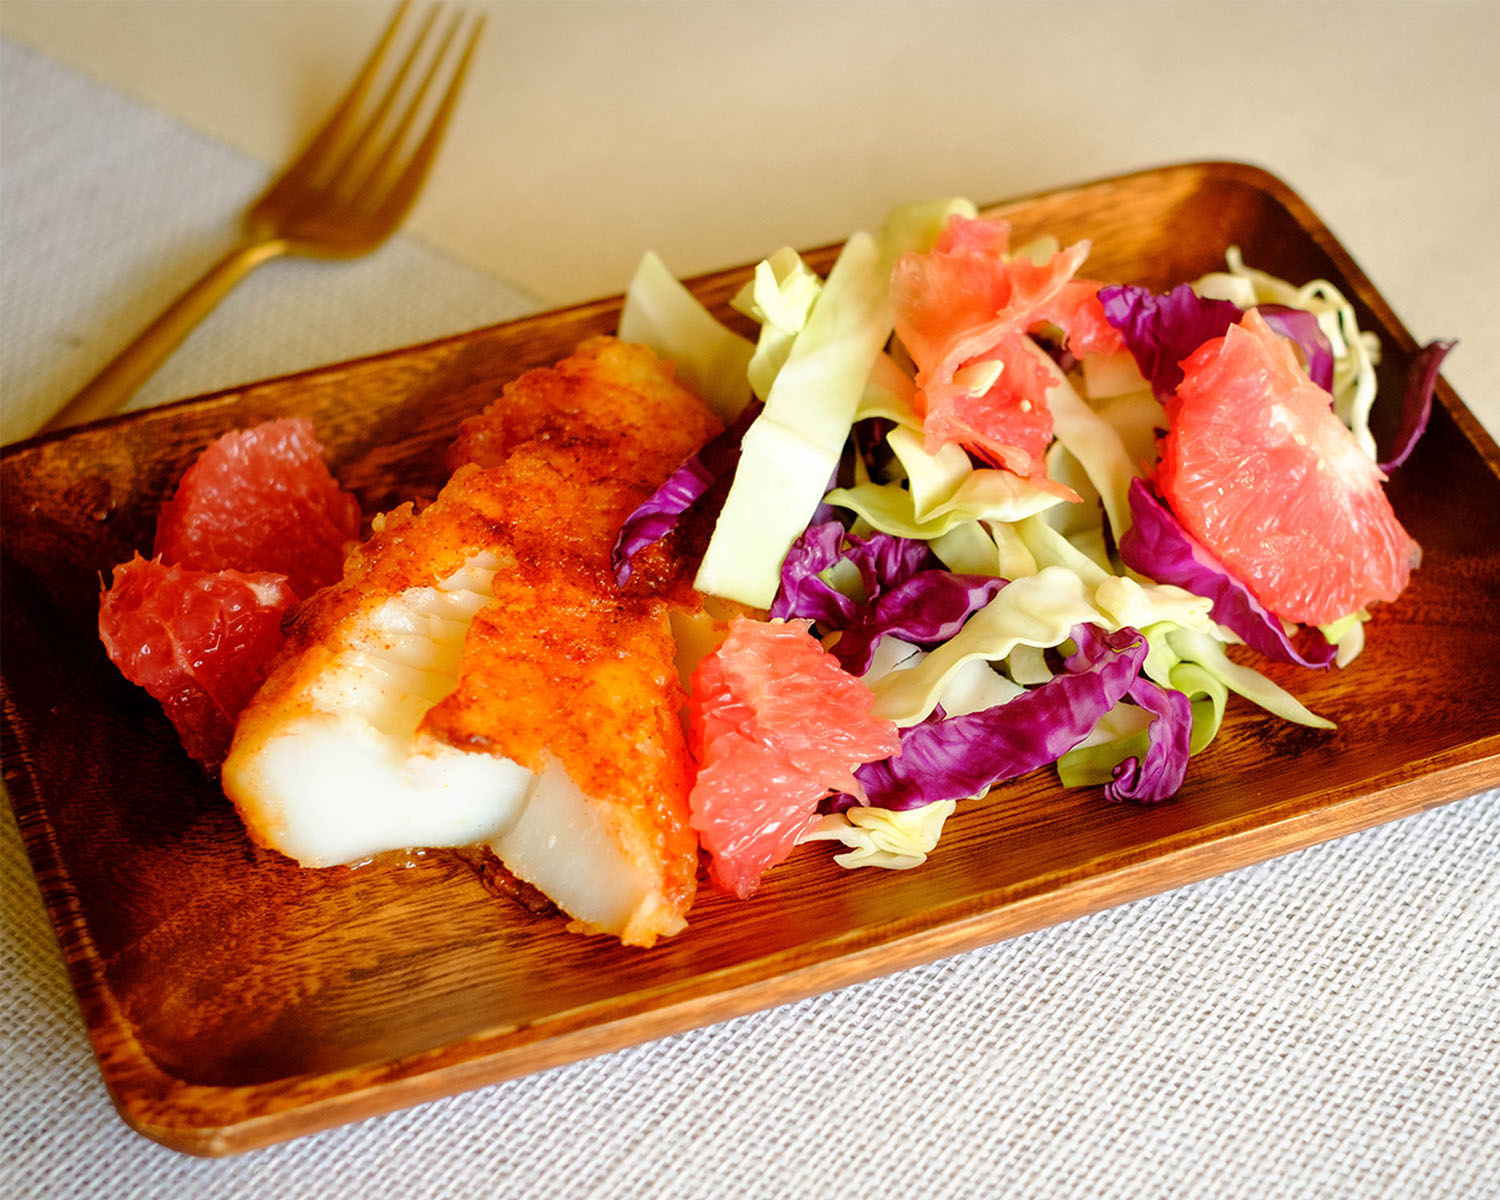 wooden plate with golden brown pan-fried cod filet and grapefruit cabbage slaw.